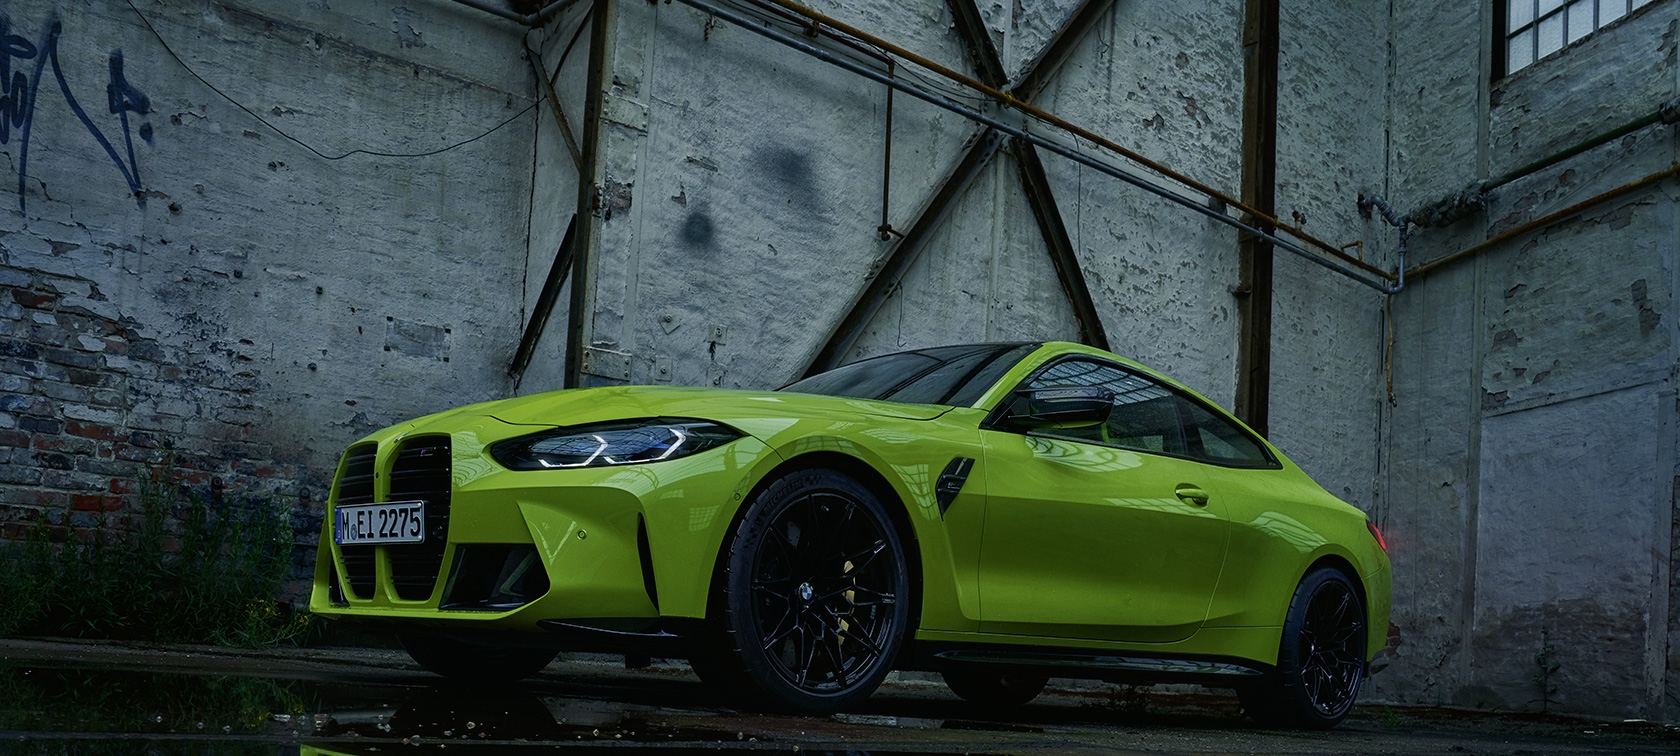 BMW M4 in Lagerhalle